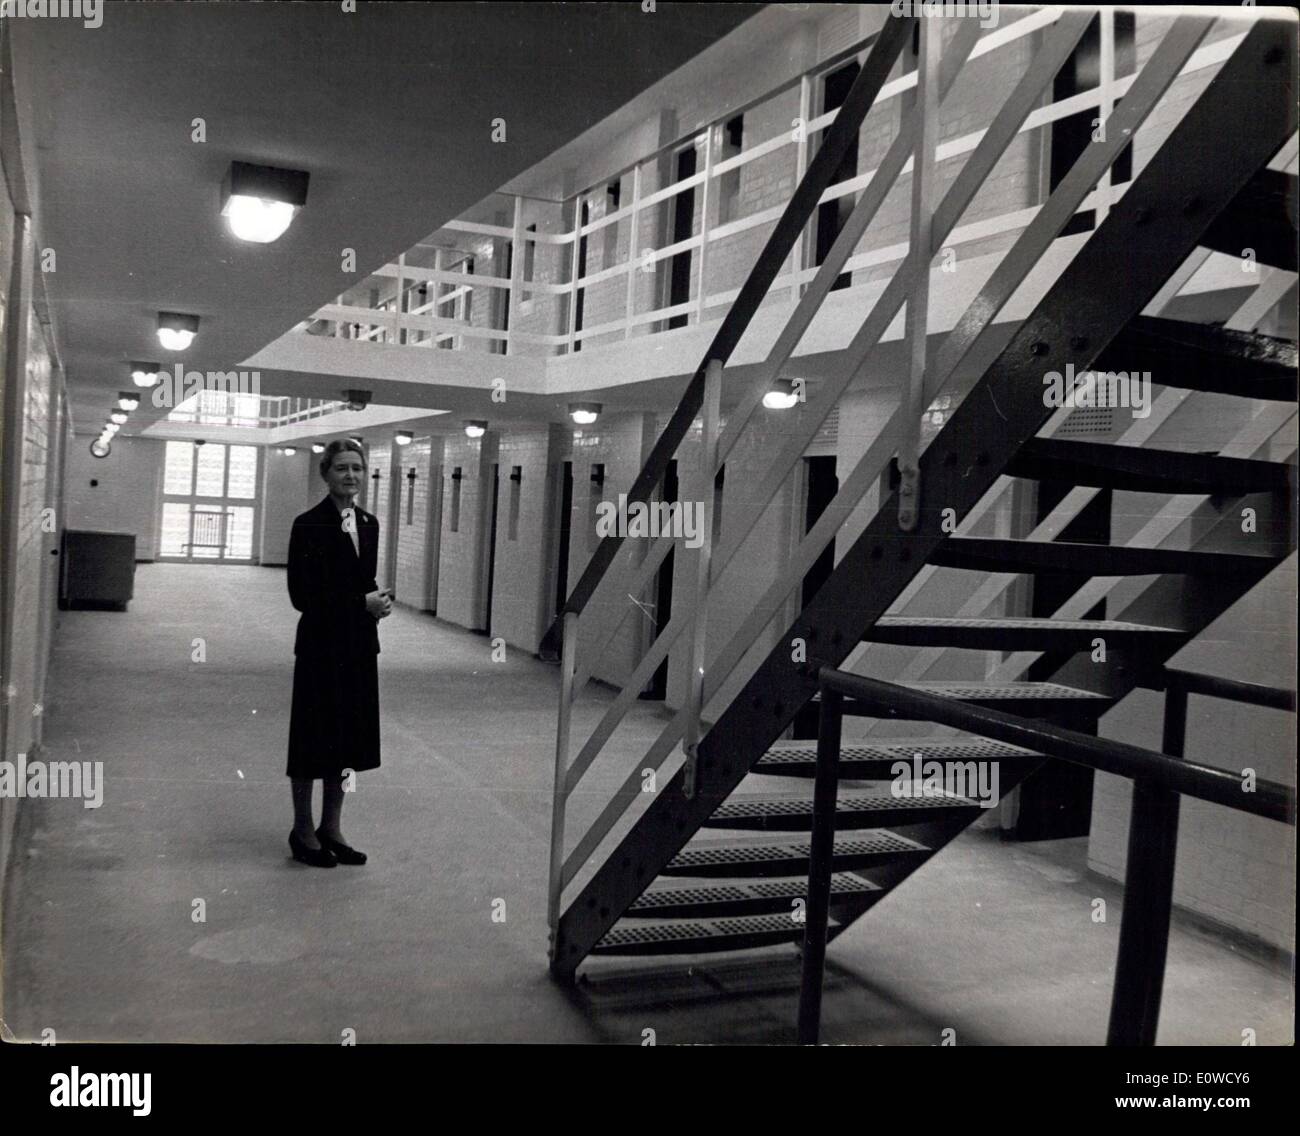 May 16, 1962 - ?Secure? Borstal for persistent girl offenders ? Today the first inmates will arrive at a new ?300,000 Borstal for persistent girl offenders from 15 to 21 at Bullwood, near Hockley, Essex., where the girls will face hard work and strict discipline in what the Home Office calls a ?secure? Borstal. It will house 96 offenders, from six months to two years. Photo Shows: The Governor, Joan Martyn, seen in one of the three living blocks at Bullwood. Keystone Stock Photo